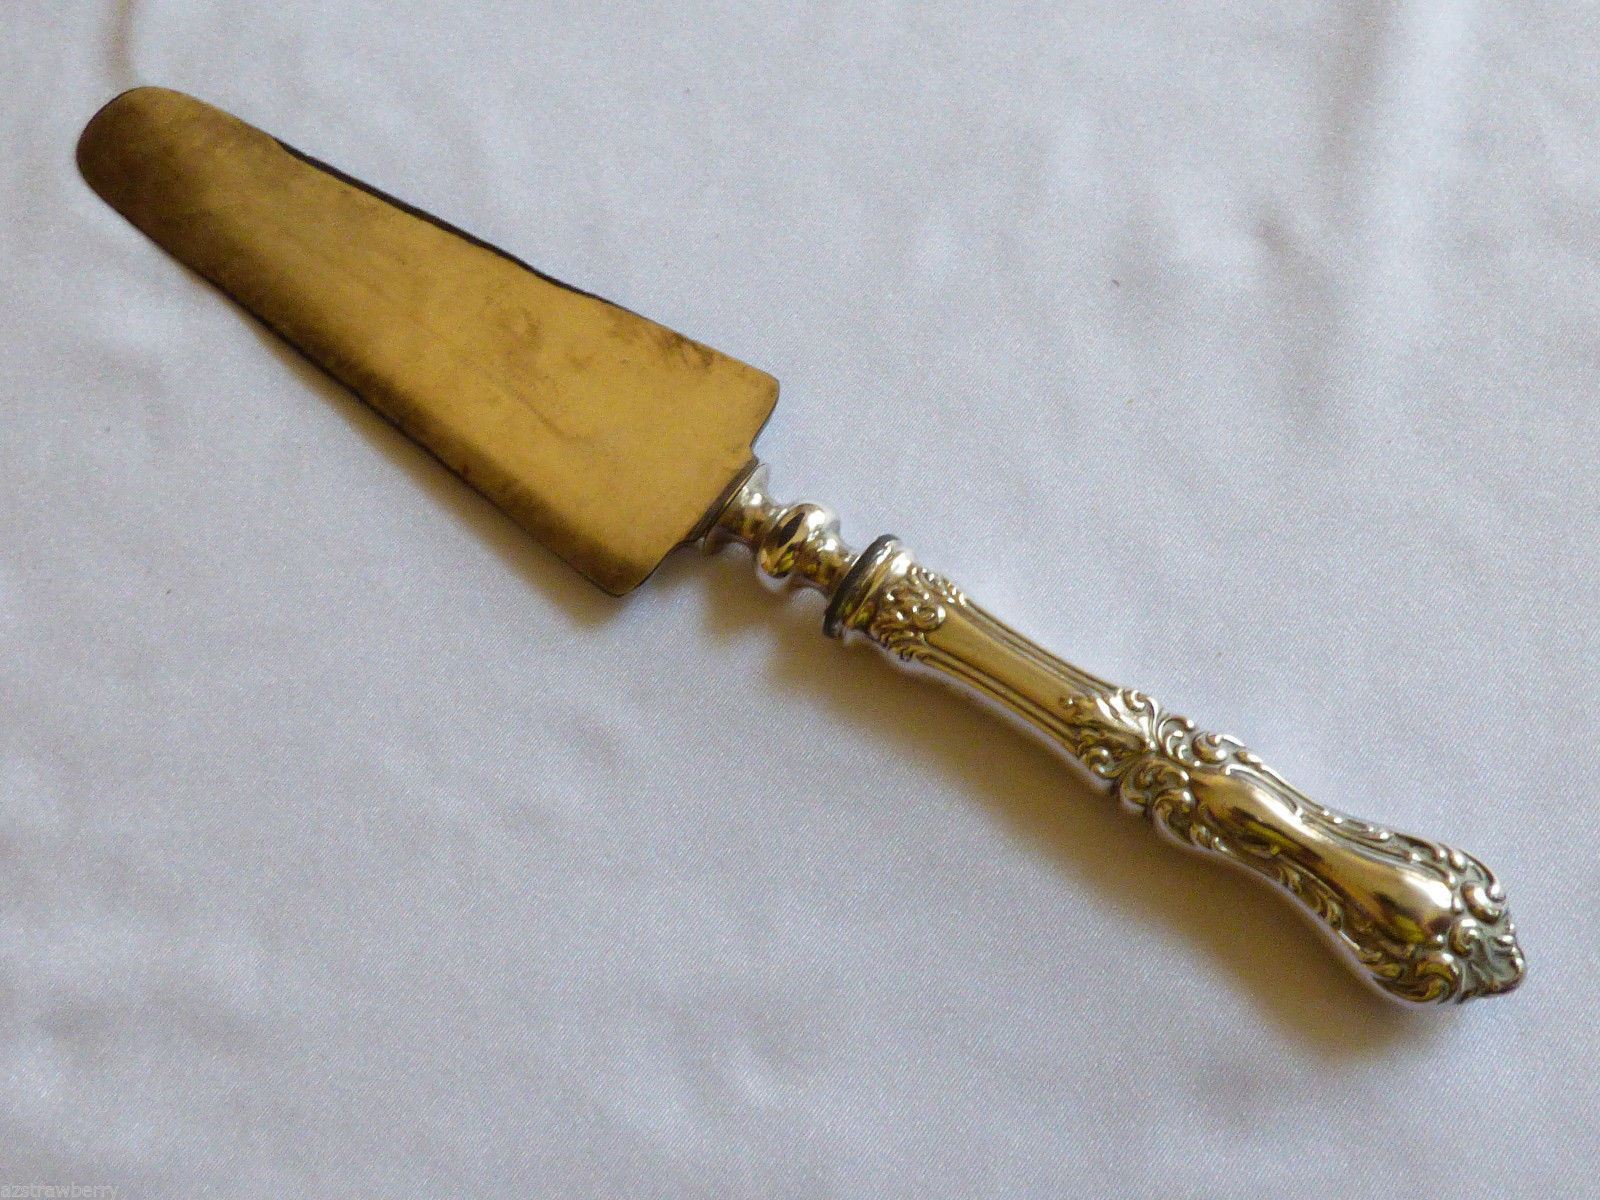 Primary image for VTG Simeon L. & George H. Rogers Company Hartford 12 PIE CAKE SERVER silverplate